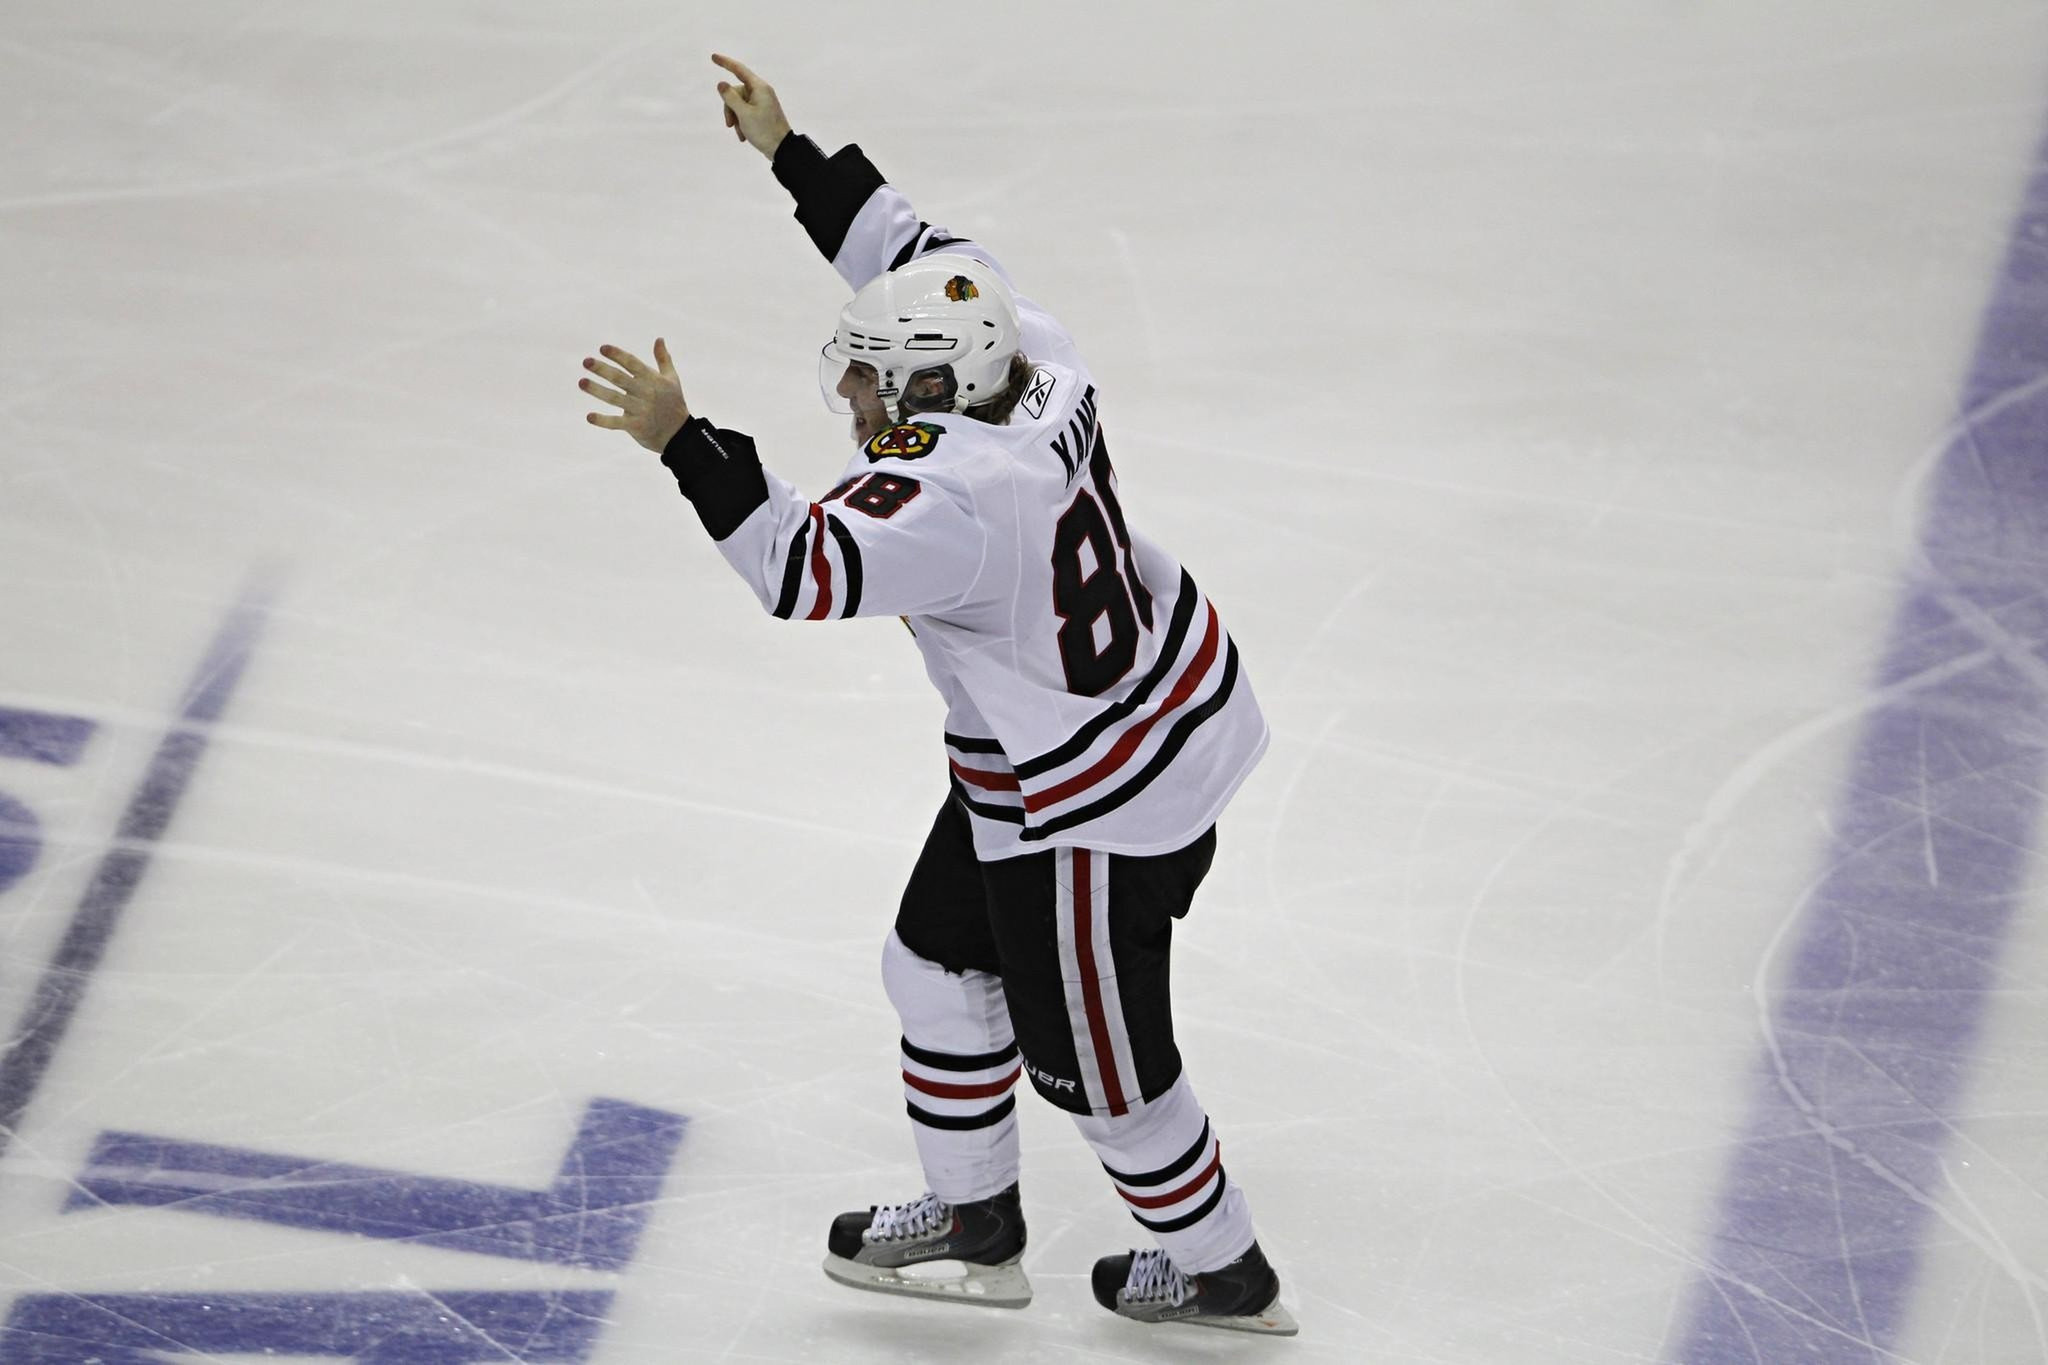 Kane and Blackhawks Force Game 7 Against Kings - The New York Times